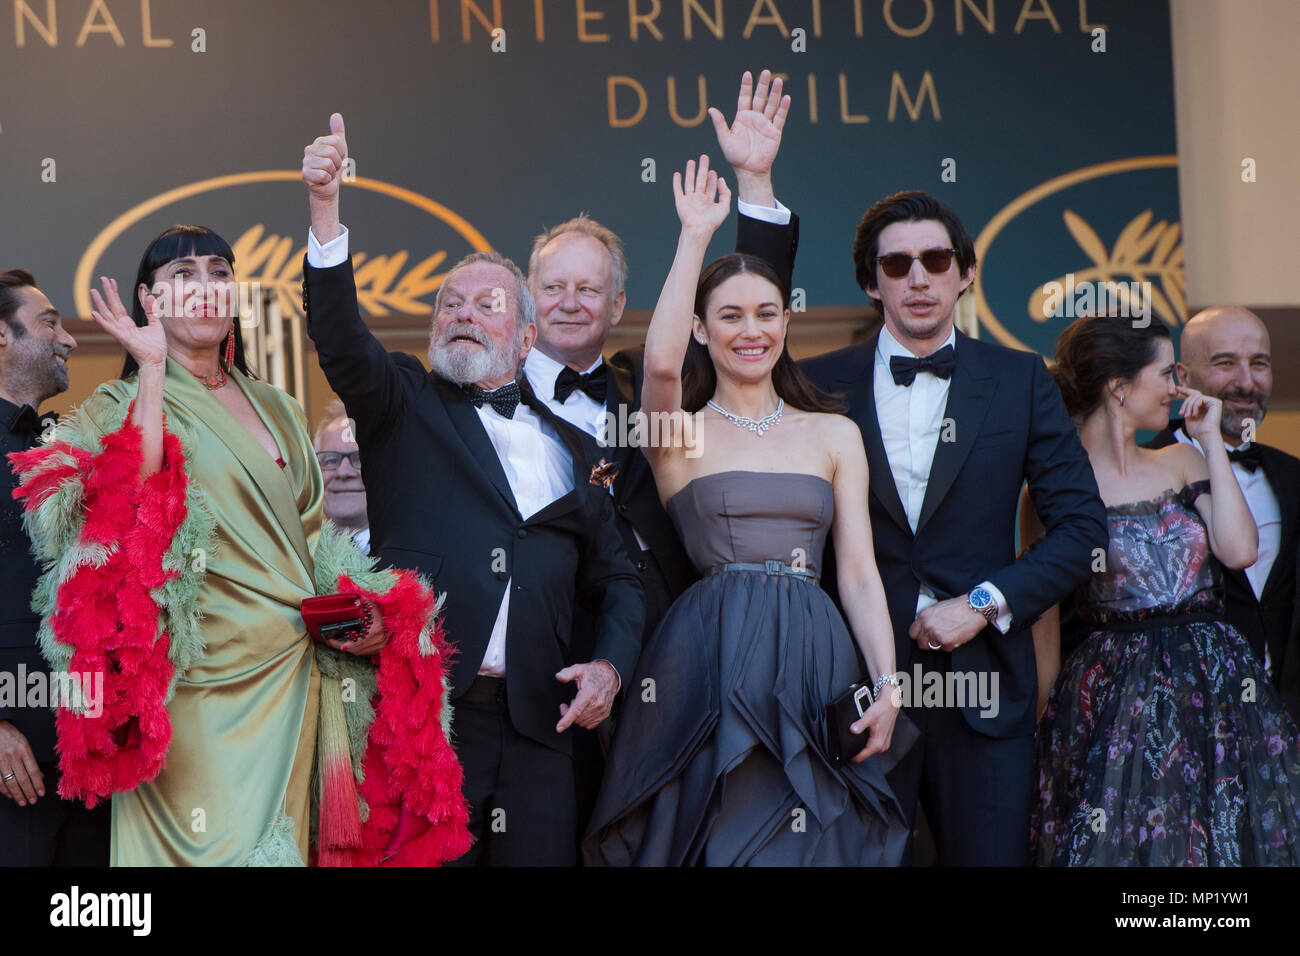 CANNES, FRANCE - MAY 19: Rossy de Palma, Terry Gilliam, Stellan Skarsgard, Olga Kurylenko, Adam Driver and Joana Ribeiro attend at the Closing Ceremony & screening of 'The Man Who Killed Don Quixote' during the 71st annual Cannes Film Festival at Palais des Festivals on May May 19, 2018 in Cannes, France Credit: BTWImages/Alamy Live News Stock Photo